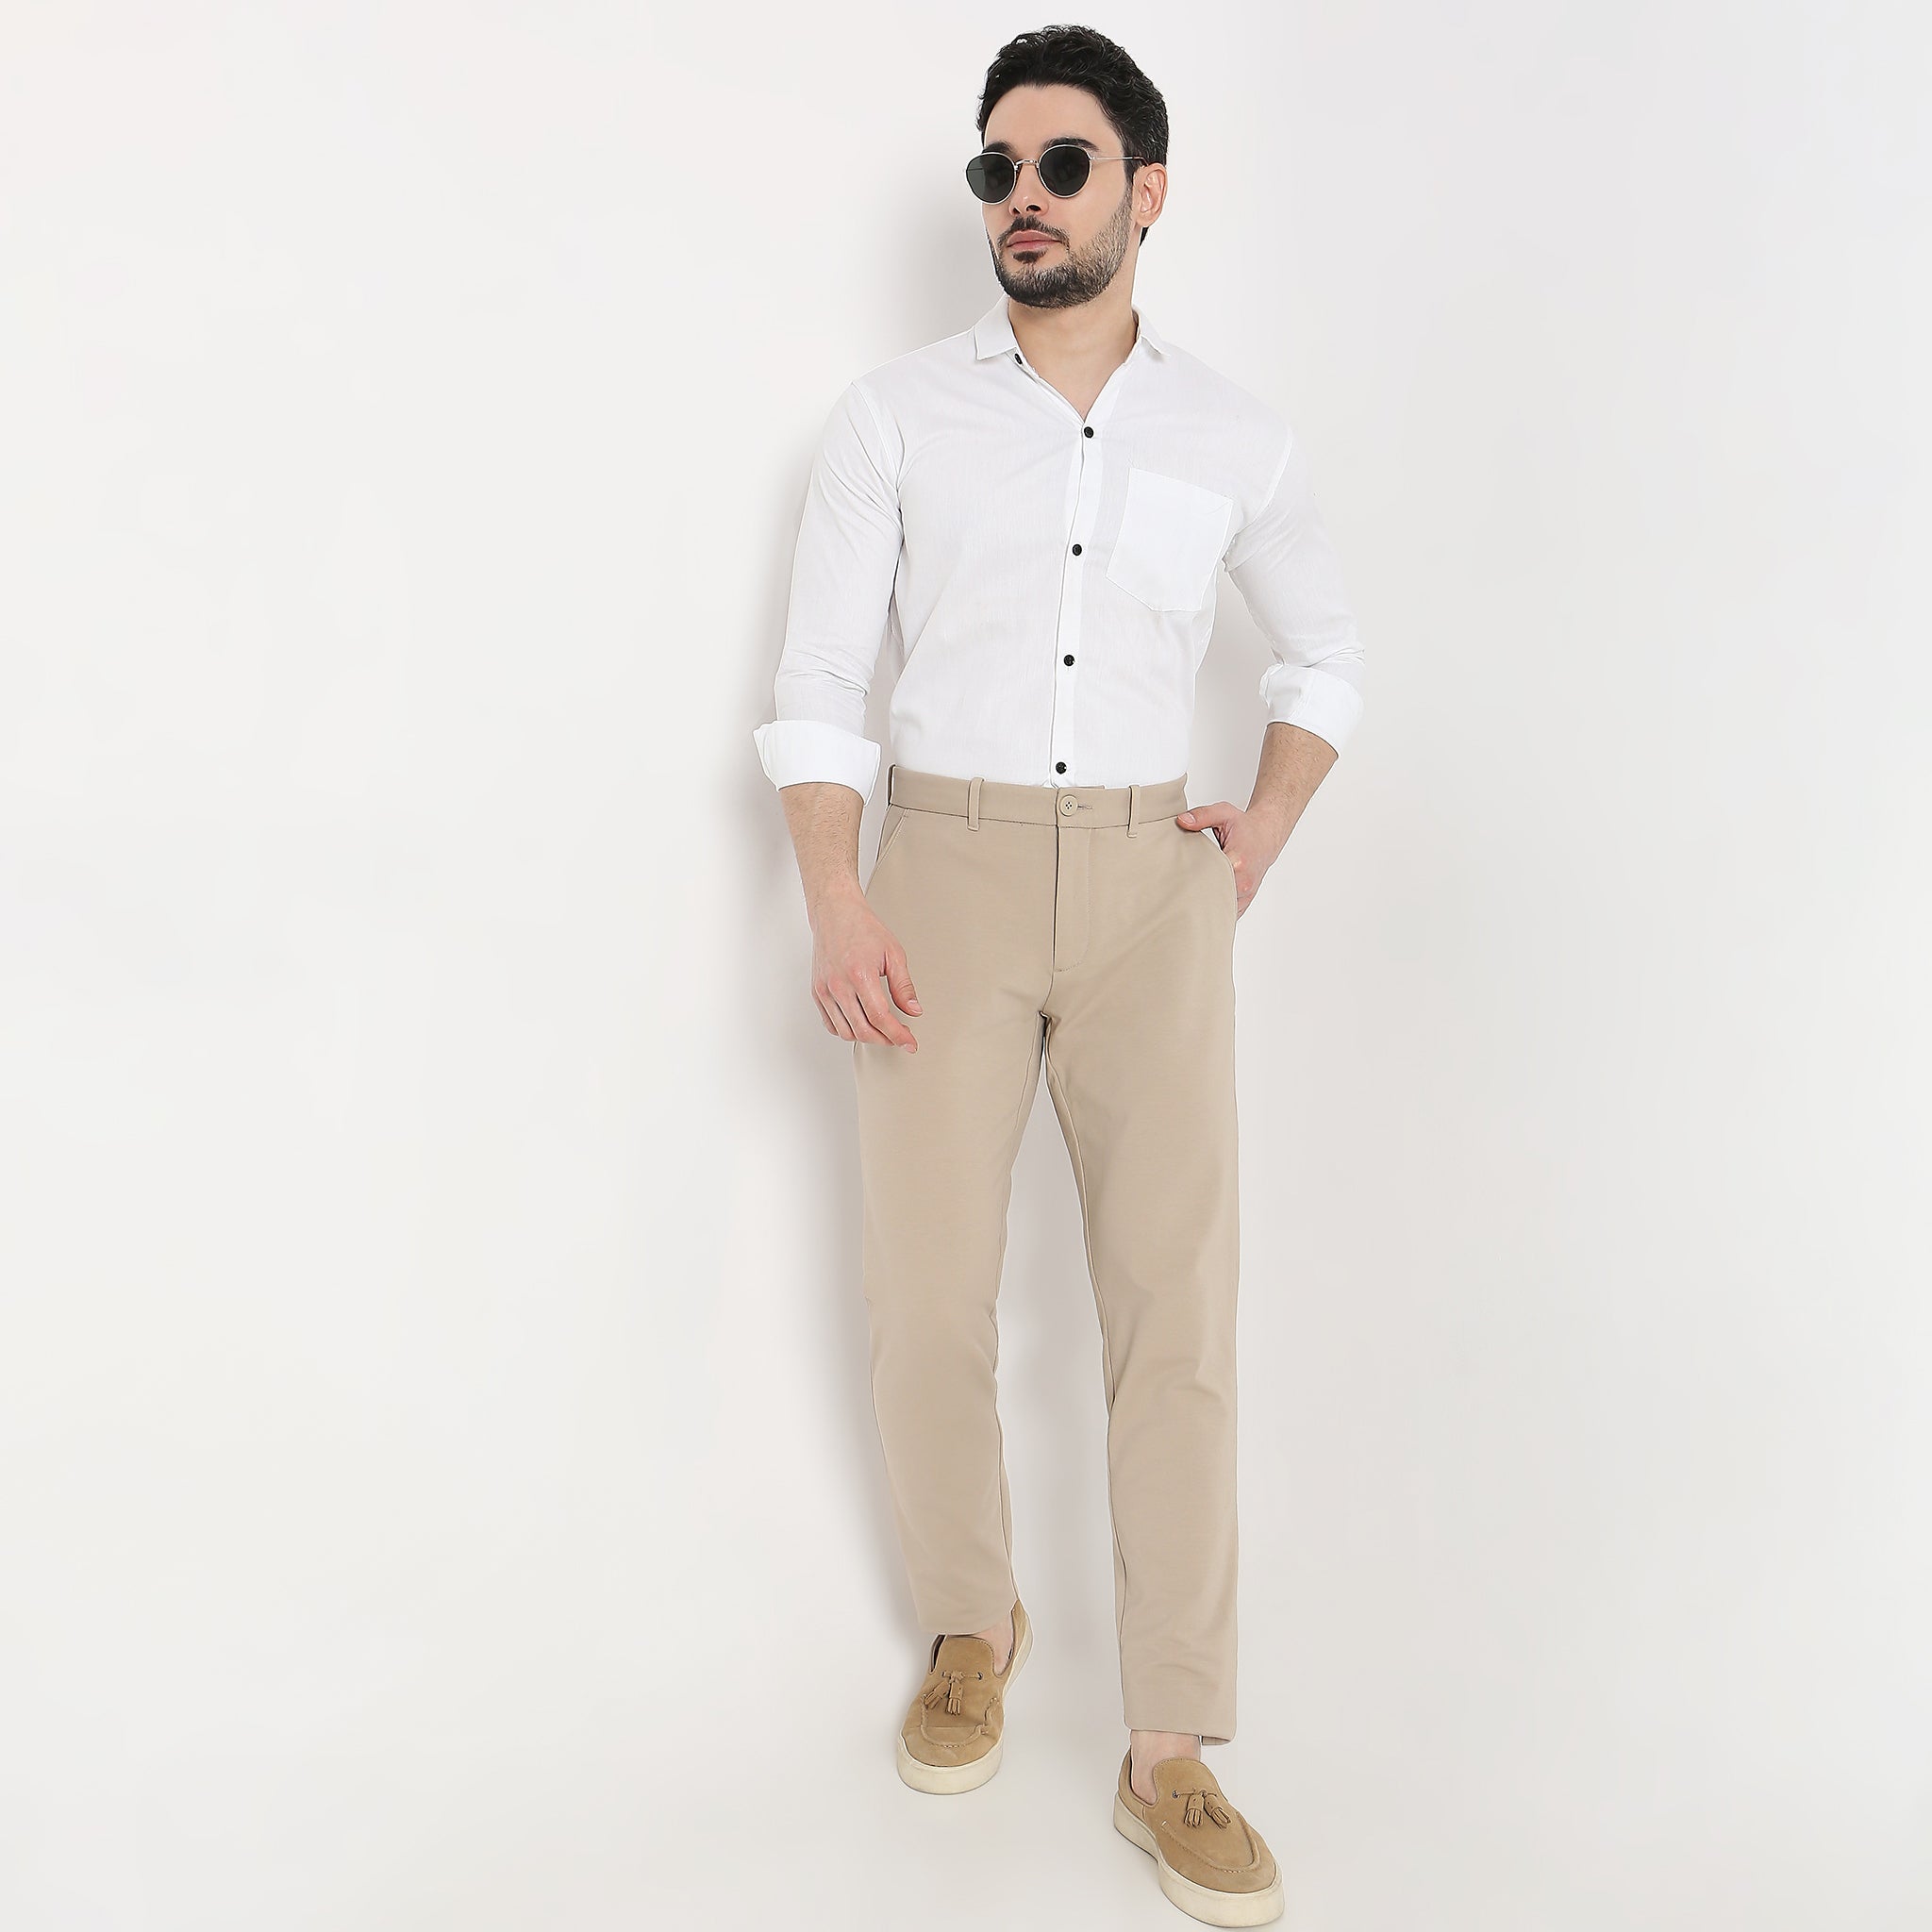 The right trouser length for suit trousers